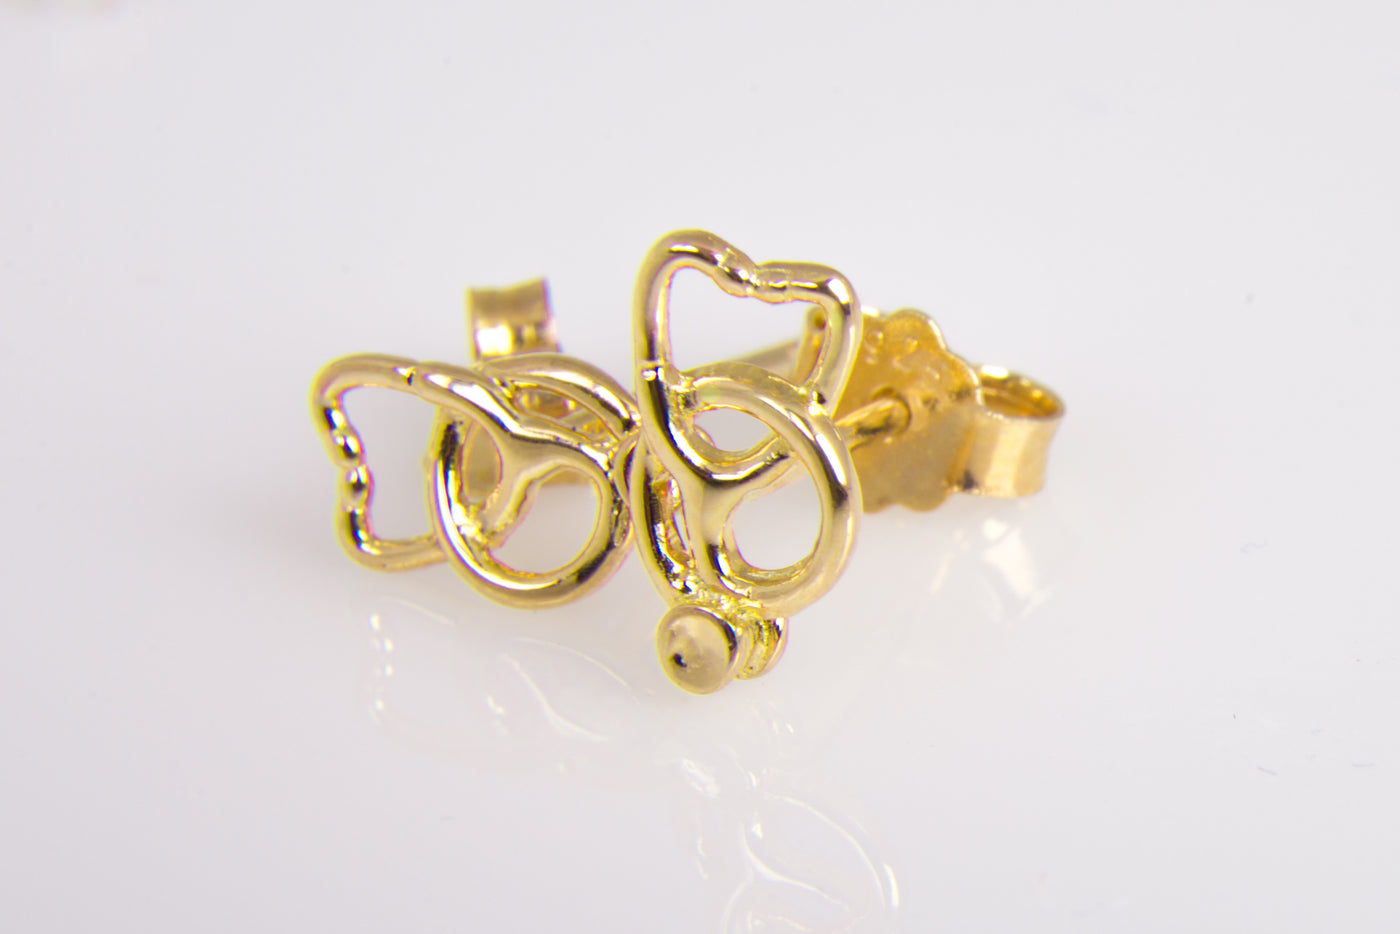 Mini Stethoscope Stud Earrings - Yellow Gold Plated Sterling Silver